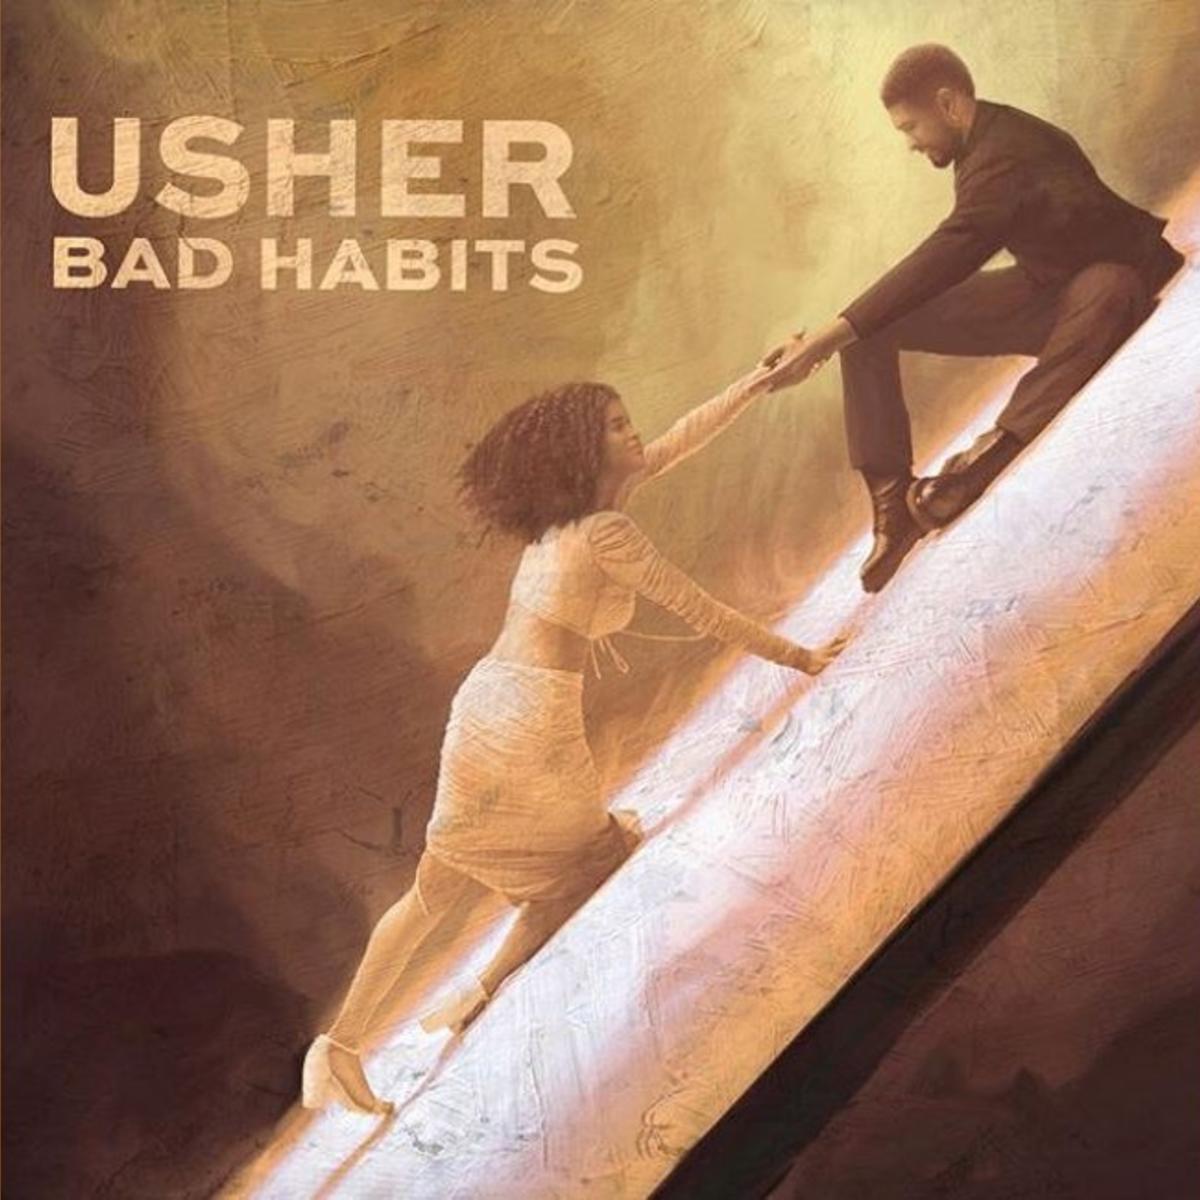 Usher Talks About His Gigolo Ways In “Bad Habits”